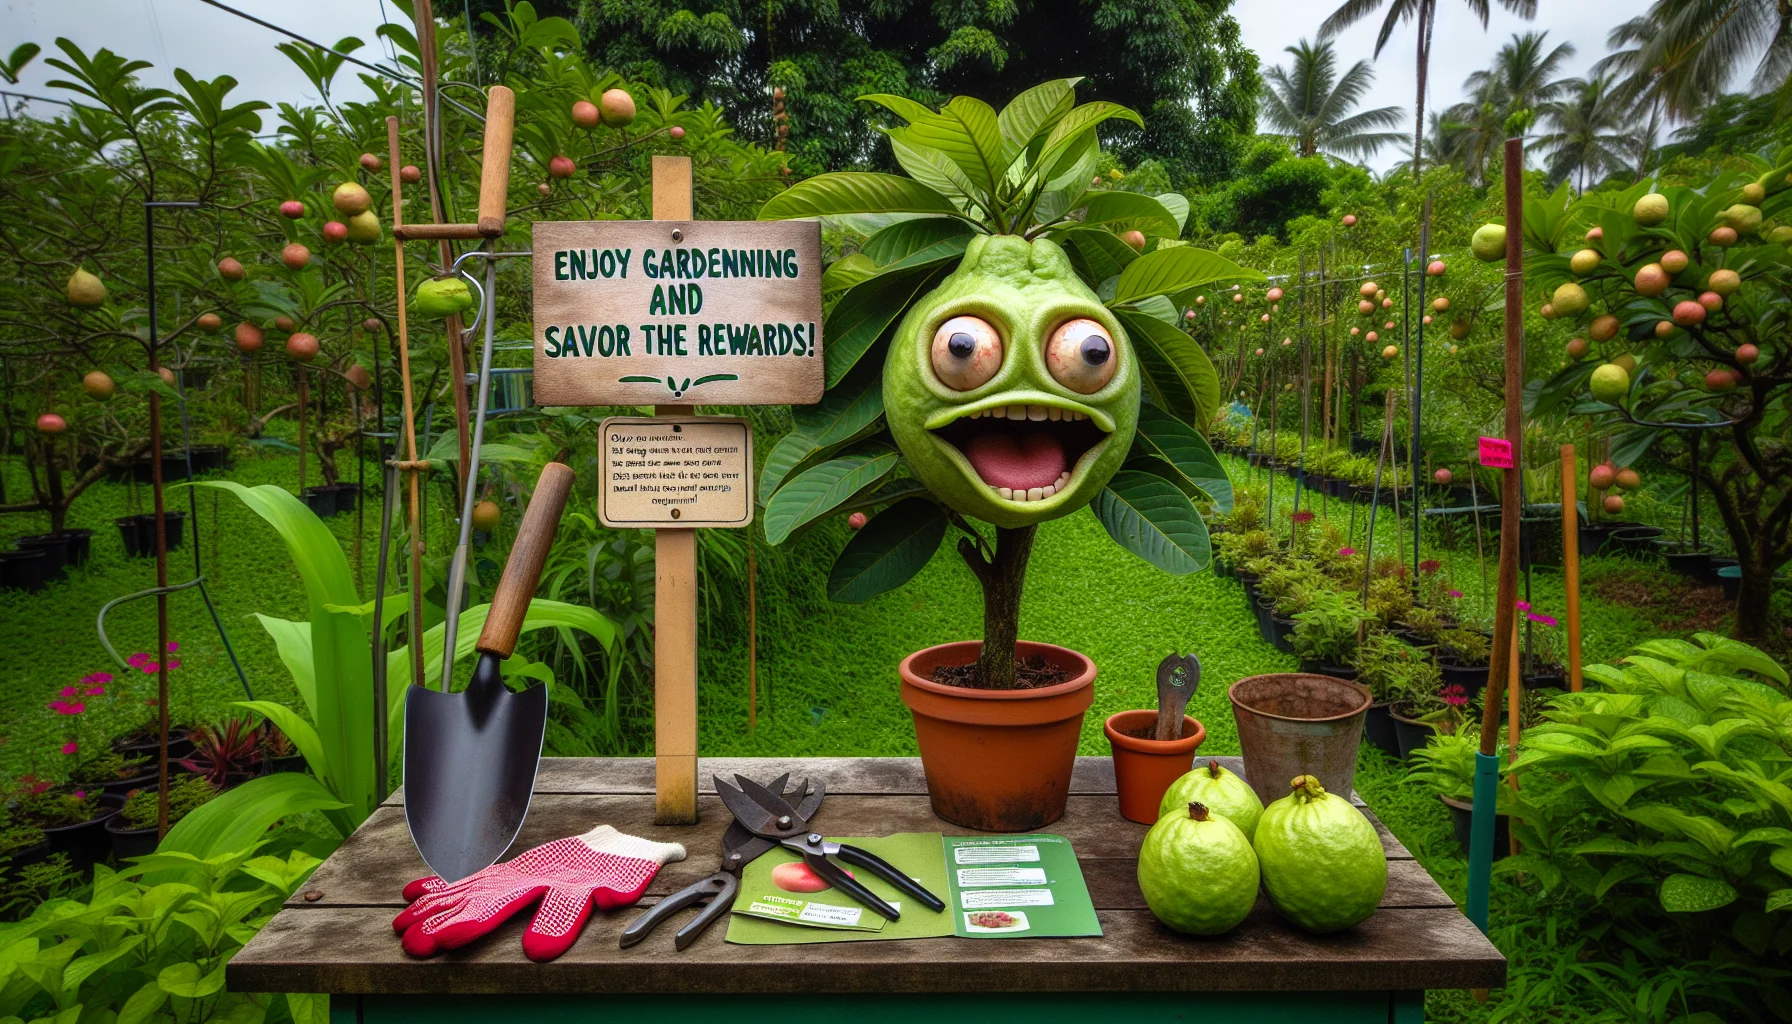 Envision a humorous scene in a lush green garden. In the midst of all the beautiful plants, a peculiar sight captures your attention: an overly ripe guava fruit that has somehow grown a hilariously exaggerated face, on a small tree in the center. Its eyes portray surprise, and its mouth is set in a wide smile, as if enjoying a private joke. Next to it, a sign reads 'Enjoy gardening and savor the rewards!' Nearby, a pair of garden shears and gloves rest on a table, indicating the labor and care that goes into maintaining such a garden, thus enticing viewers to try gardening themselves.